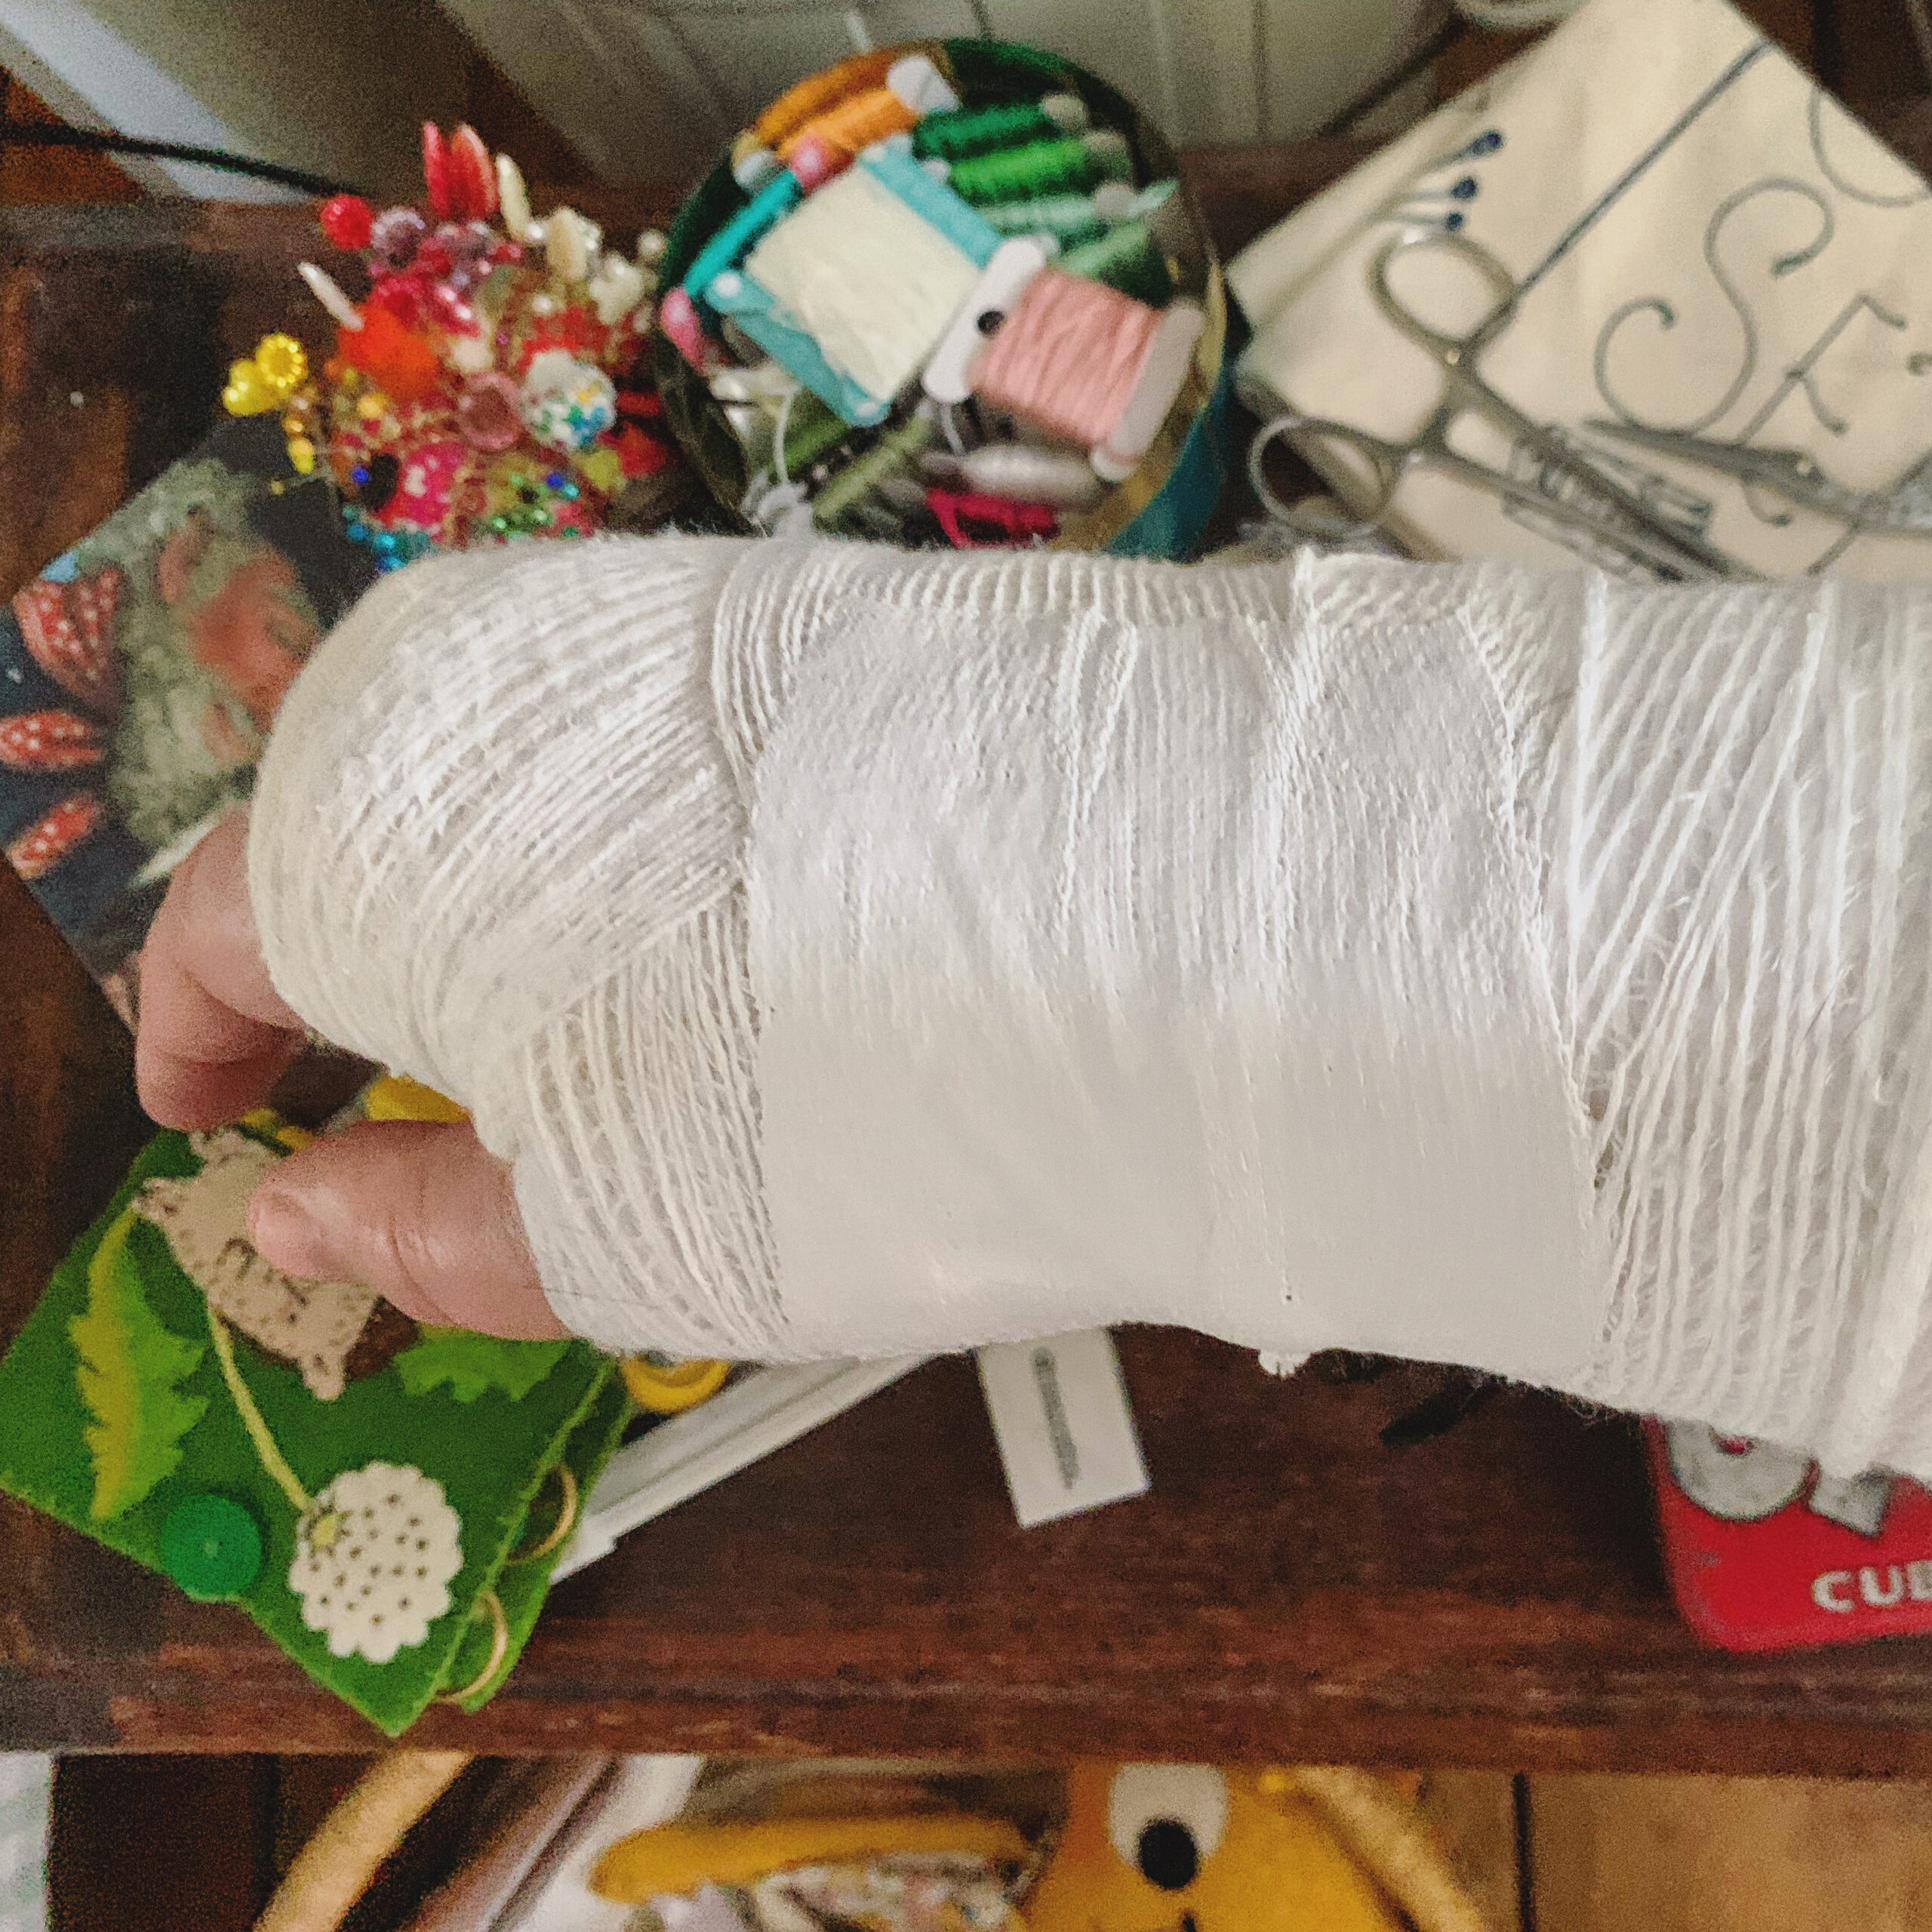 myforearm wrist and arm in a plaster ouchy cast